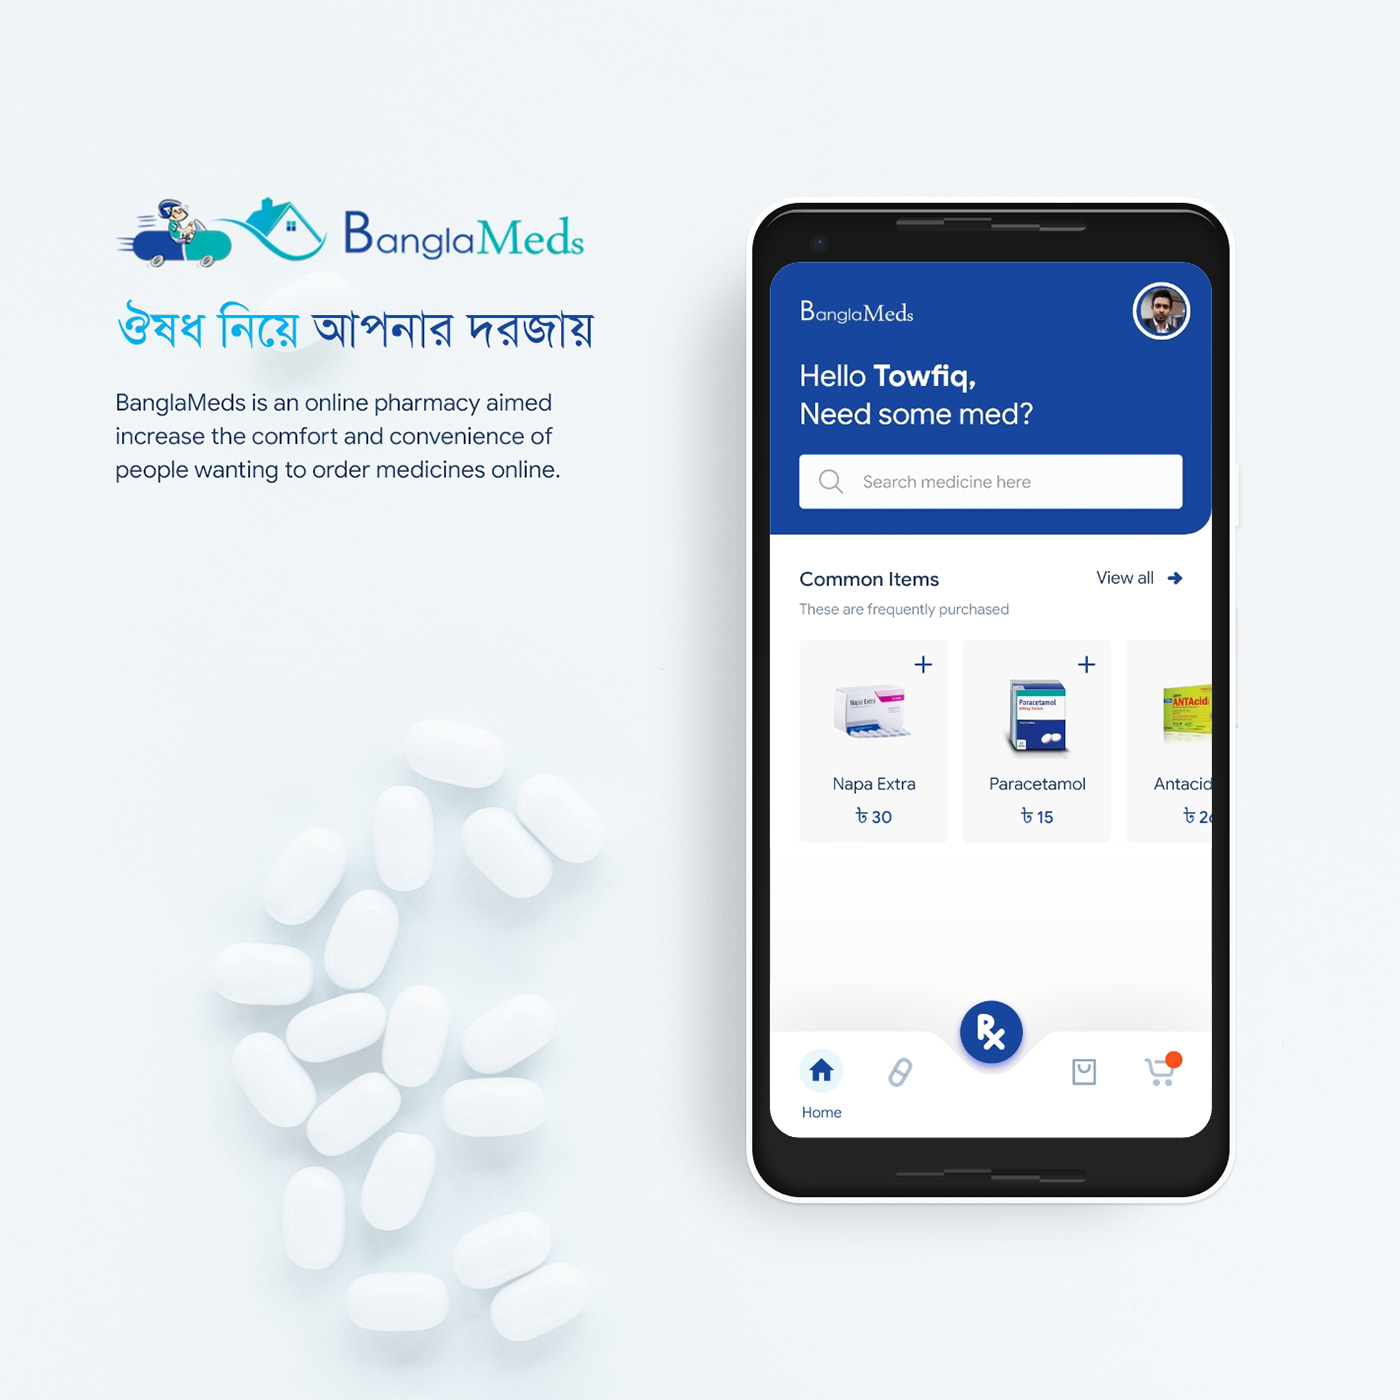 Online pharmacy to order medicine with ease